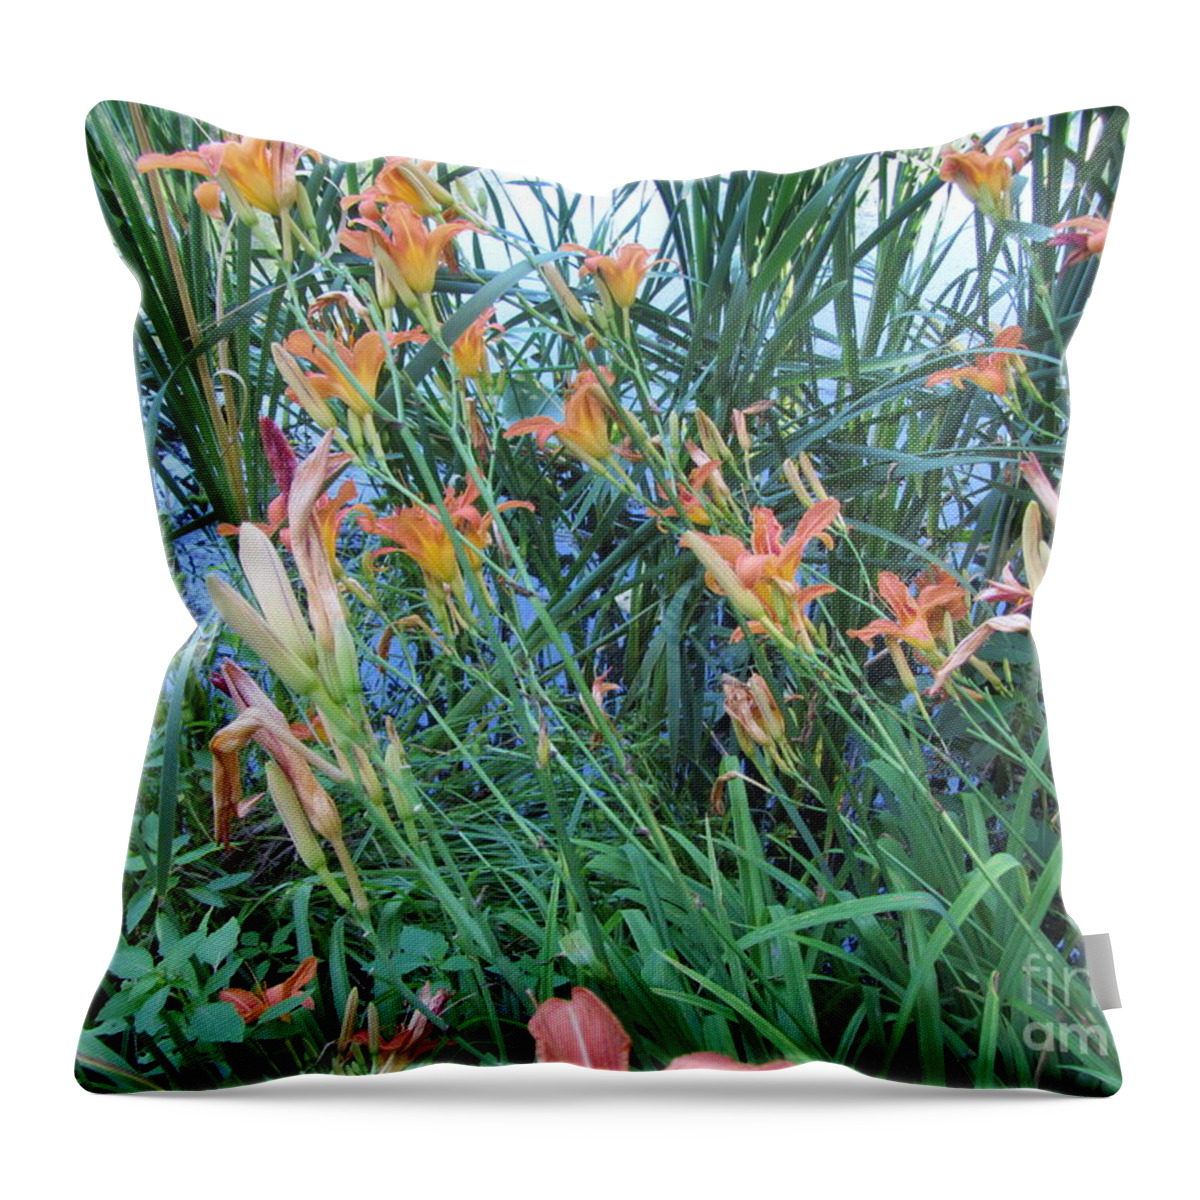 Water Throw Pillow featuring the photograph Lake Of The Lilies by Susan Carella